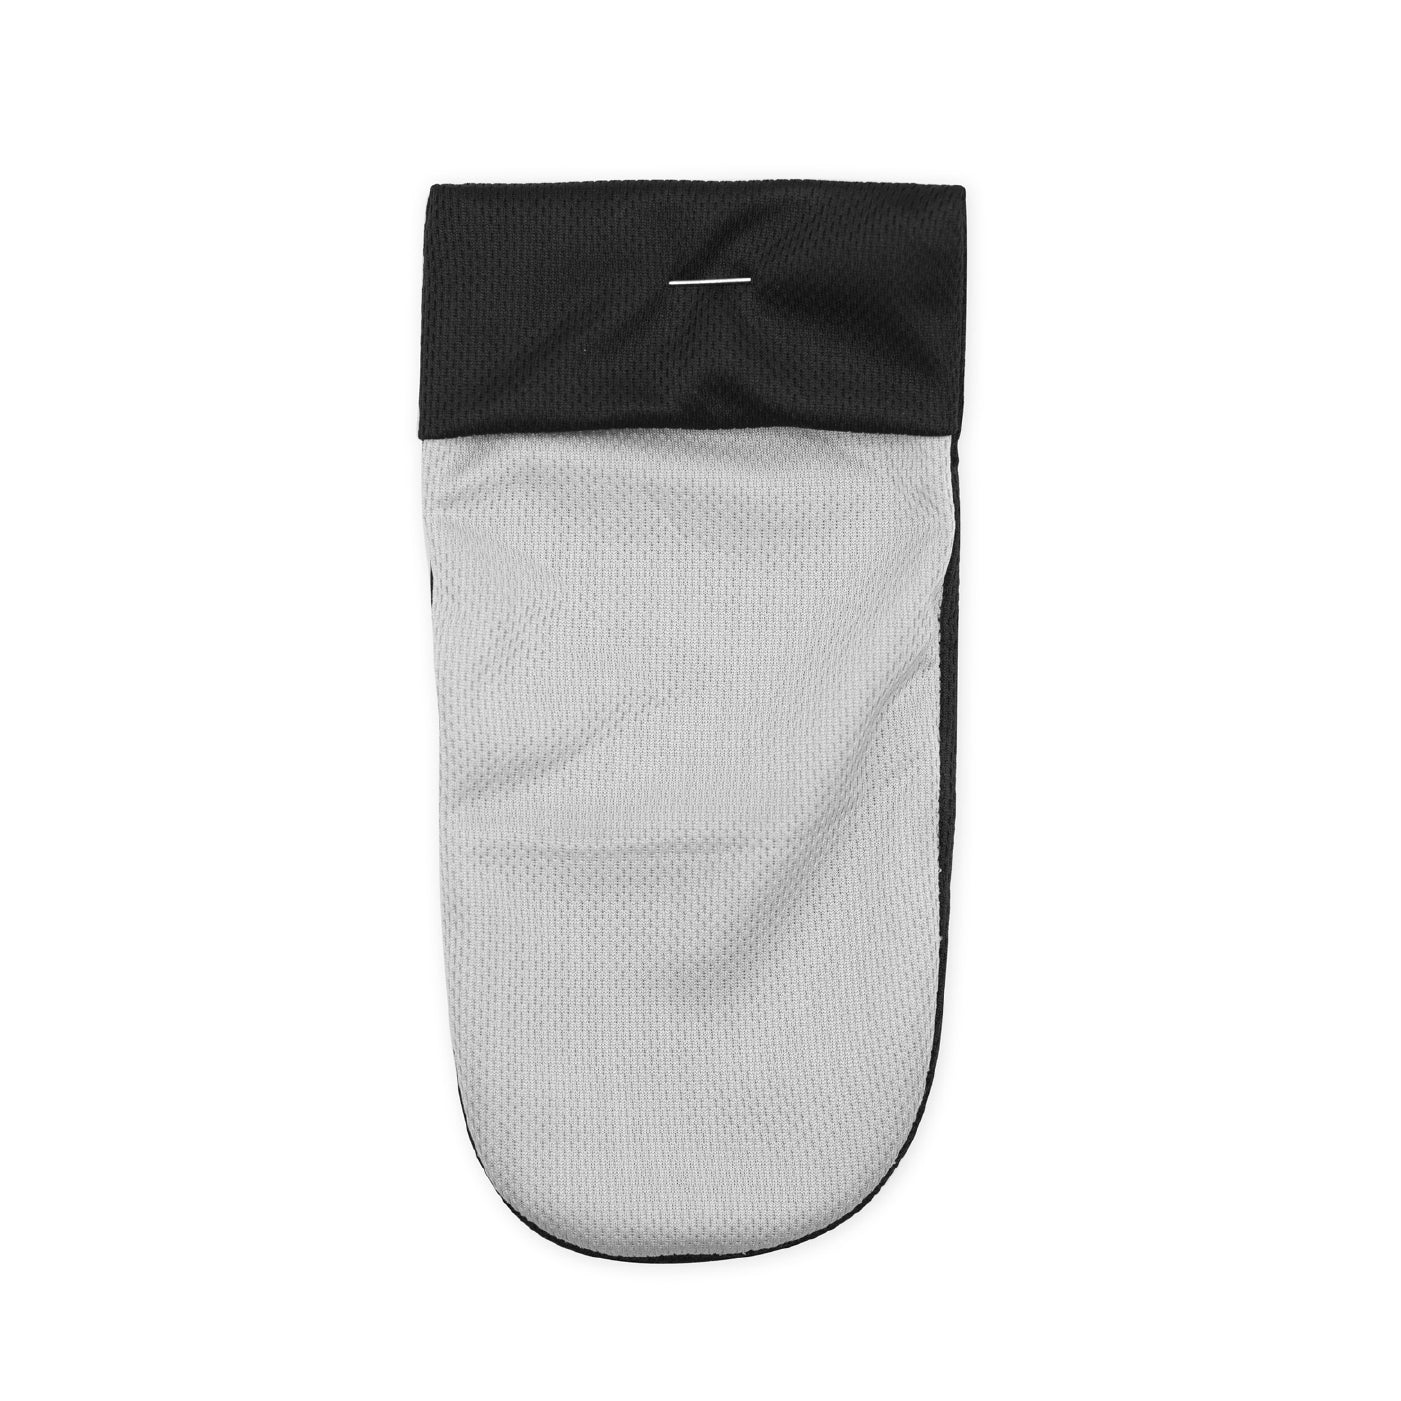 A Ballsy Sports Joey pouch on a white background